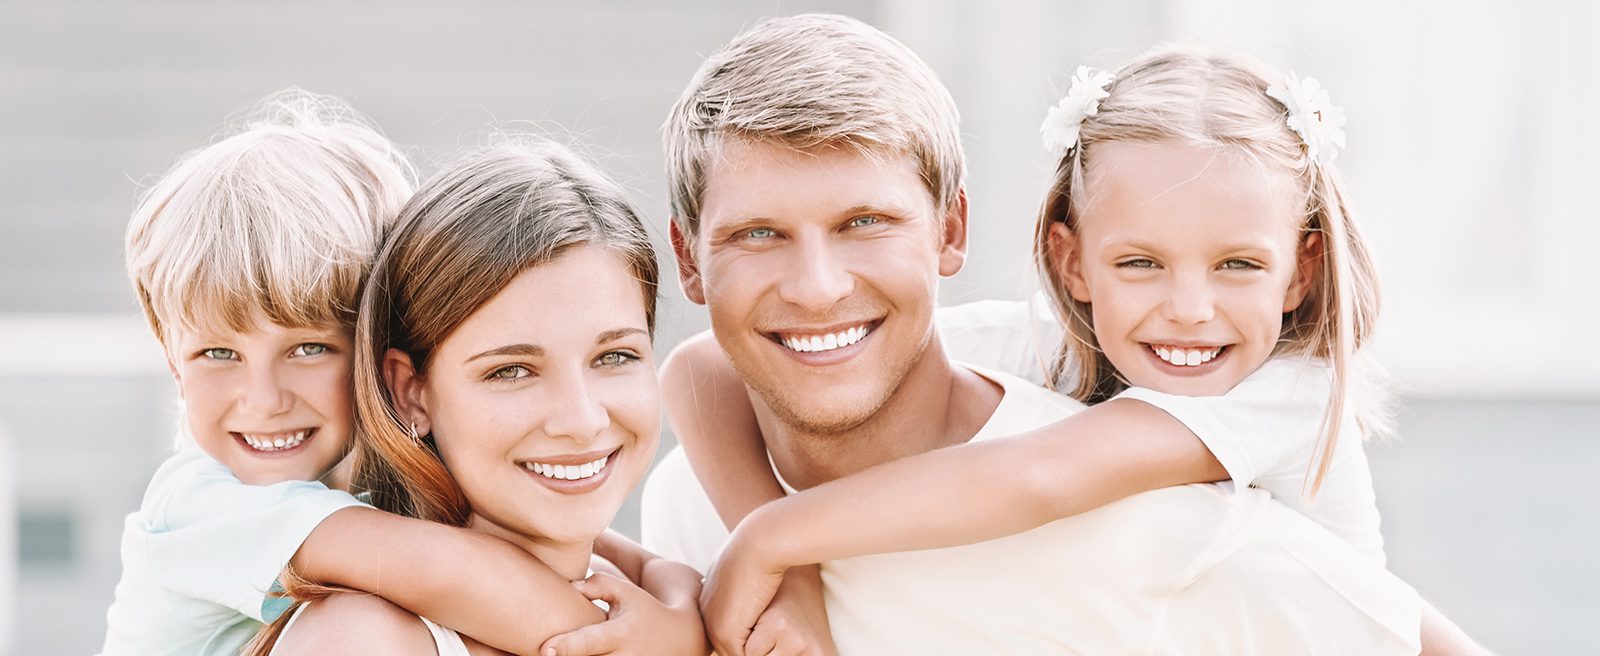 Family with two children smiling